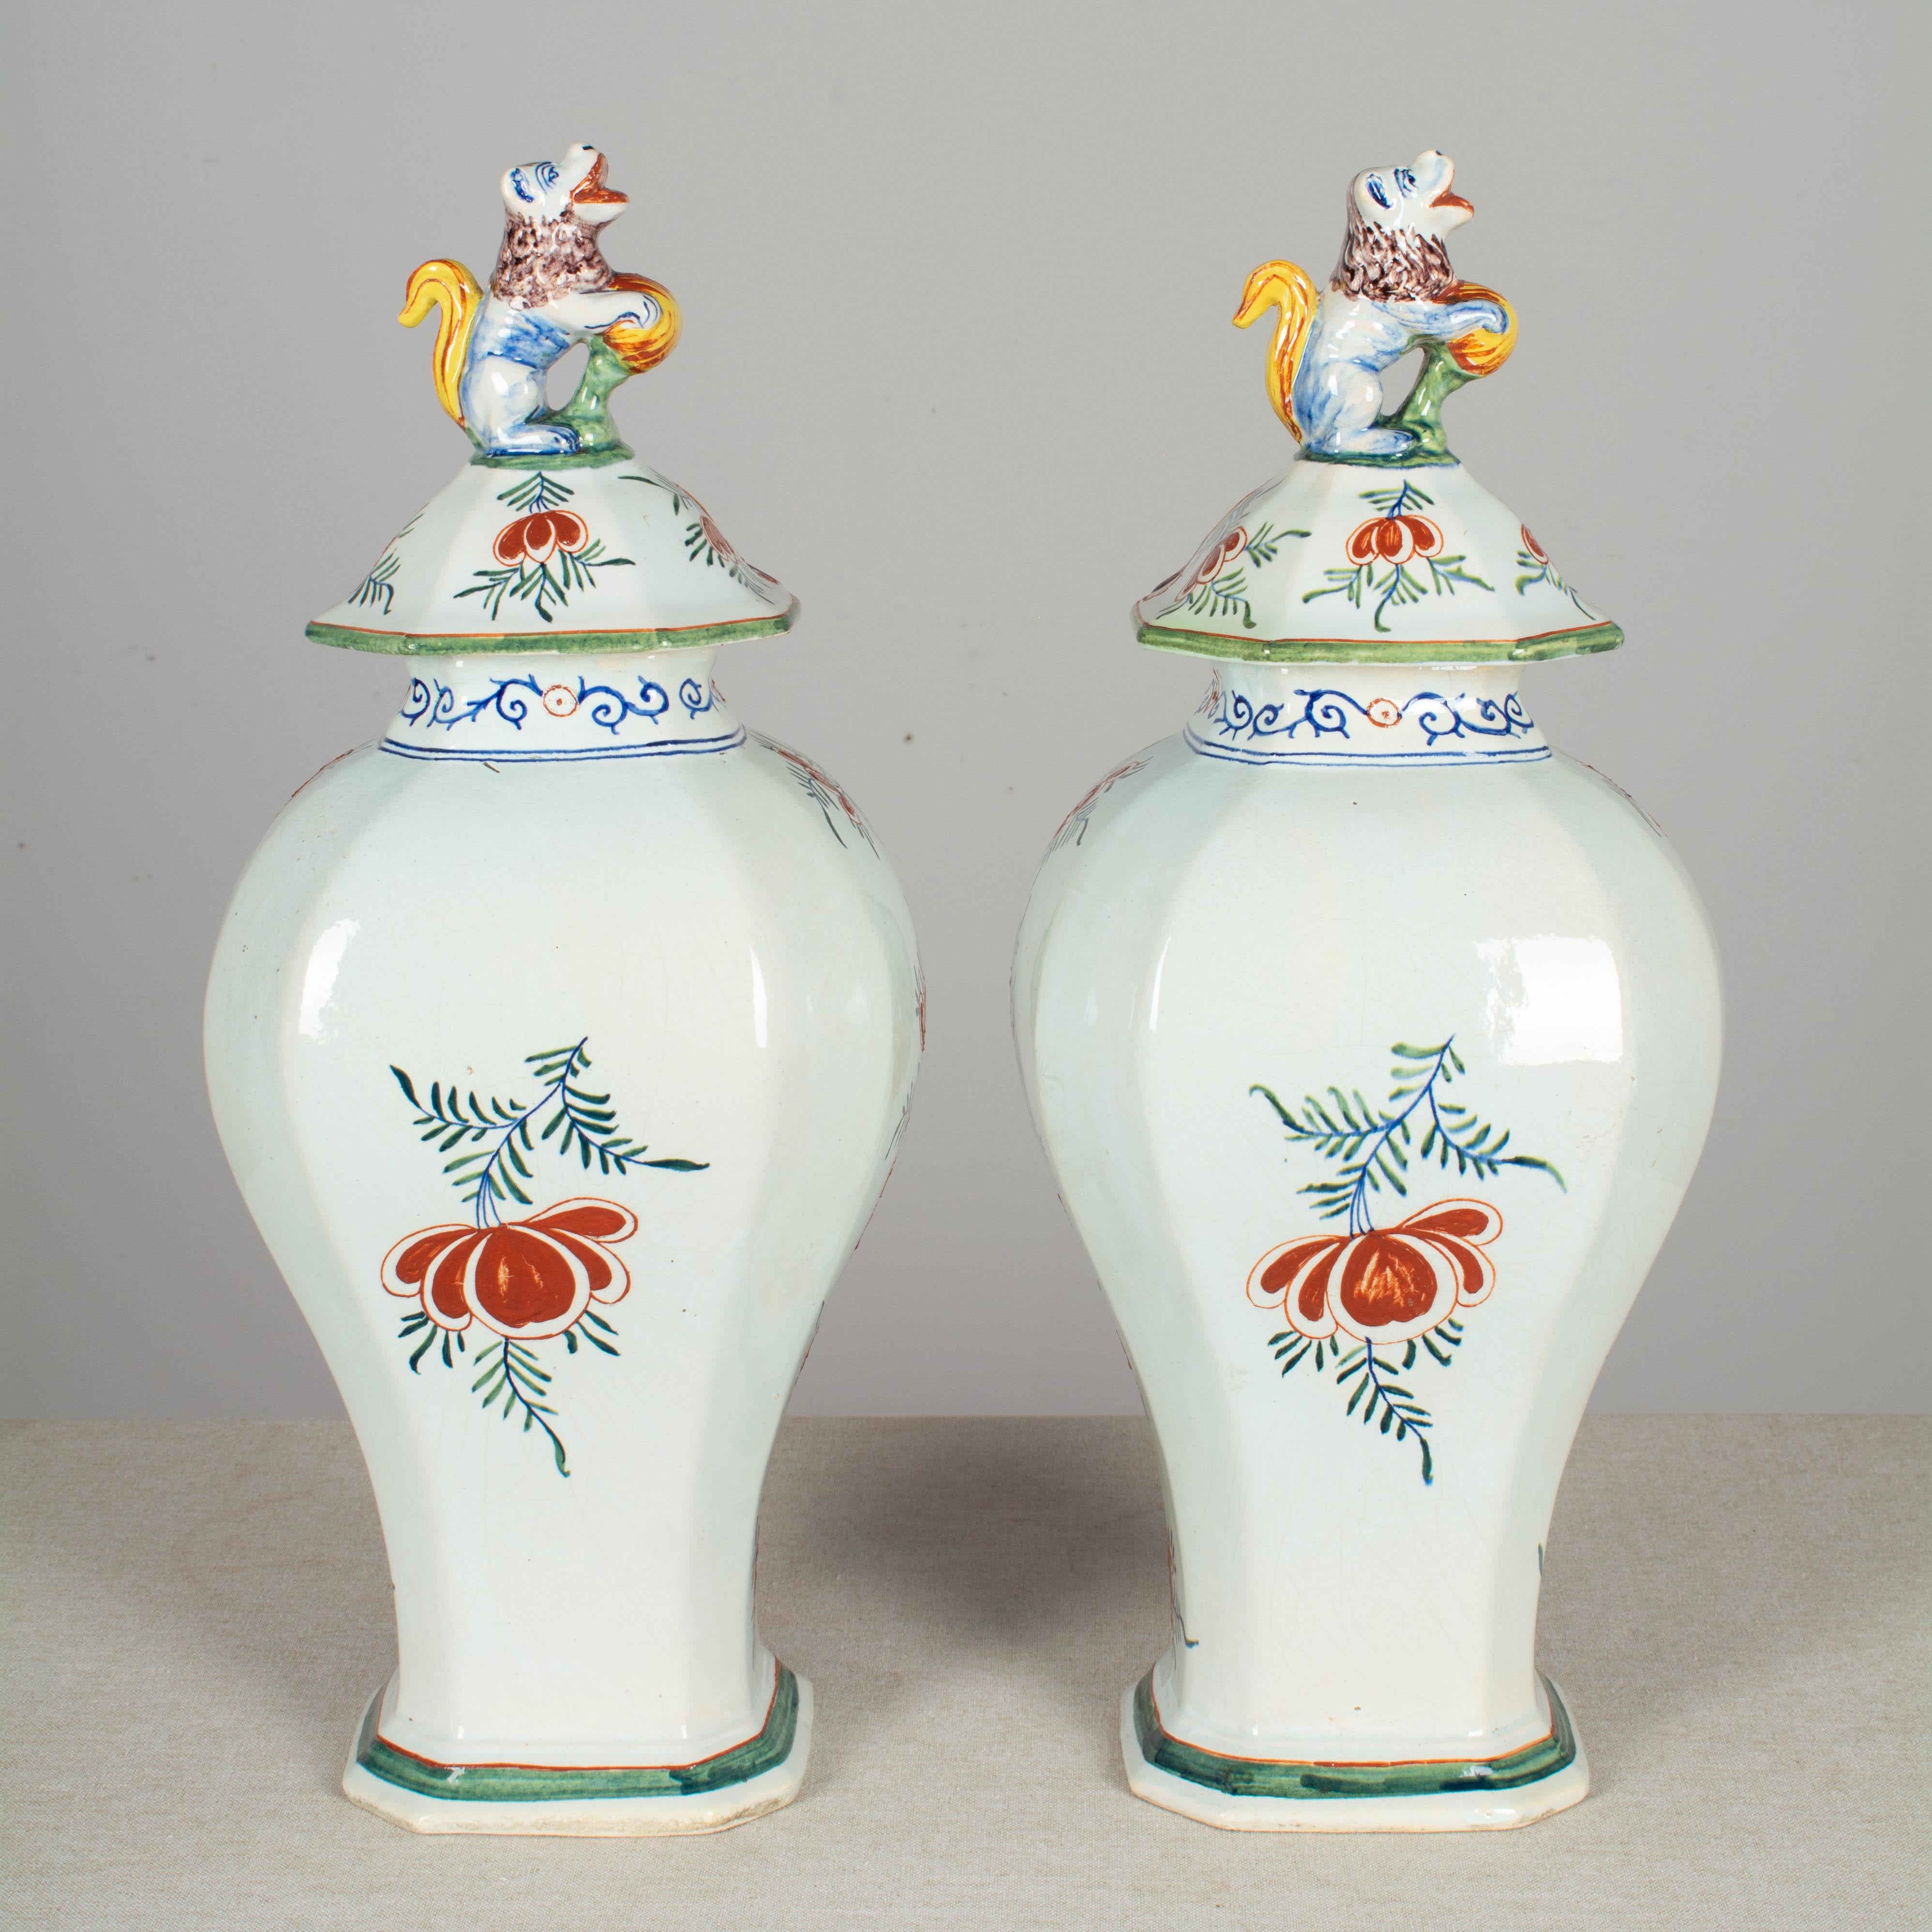 A pair of 17th century Delft faience polychrome painted tin glazed ginger jars with octagonal urn form and lids topped with sculptural foo lions. Bold design with elaborate, colorful hand painted decoration in thick raised relief. The front panels